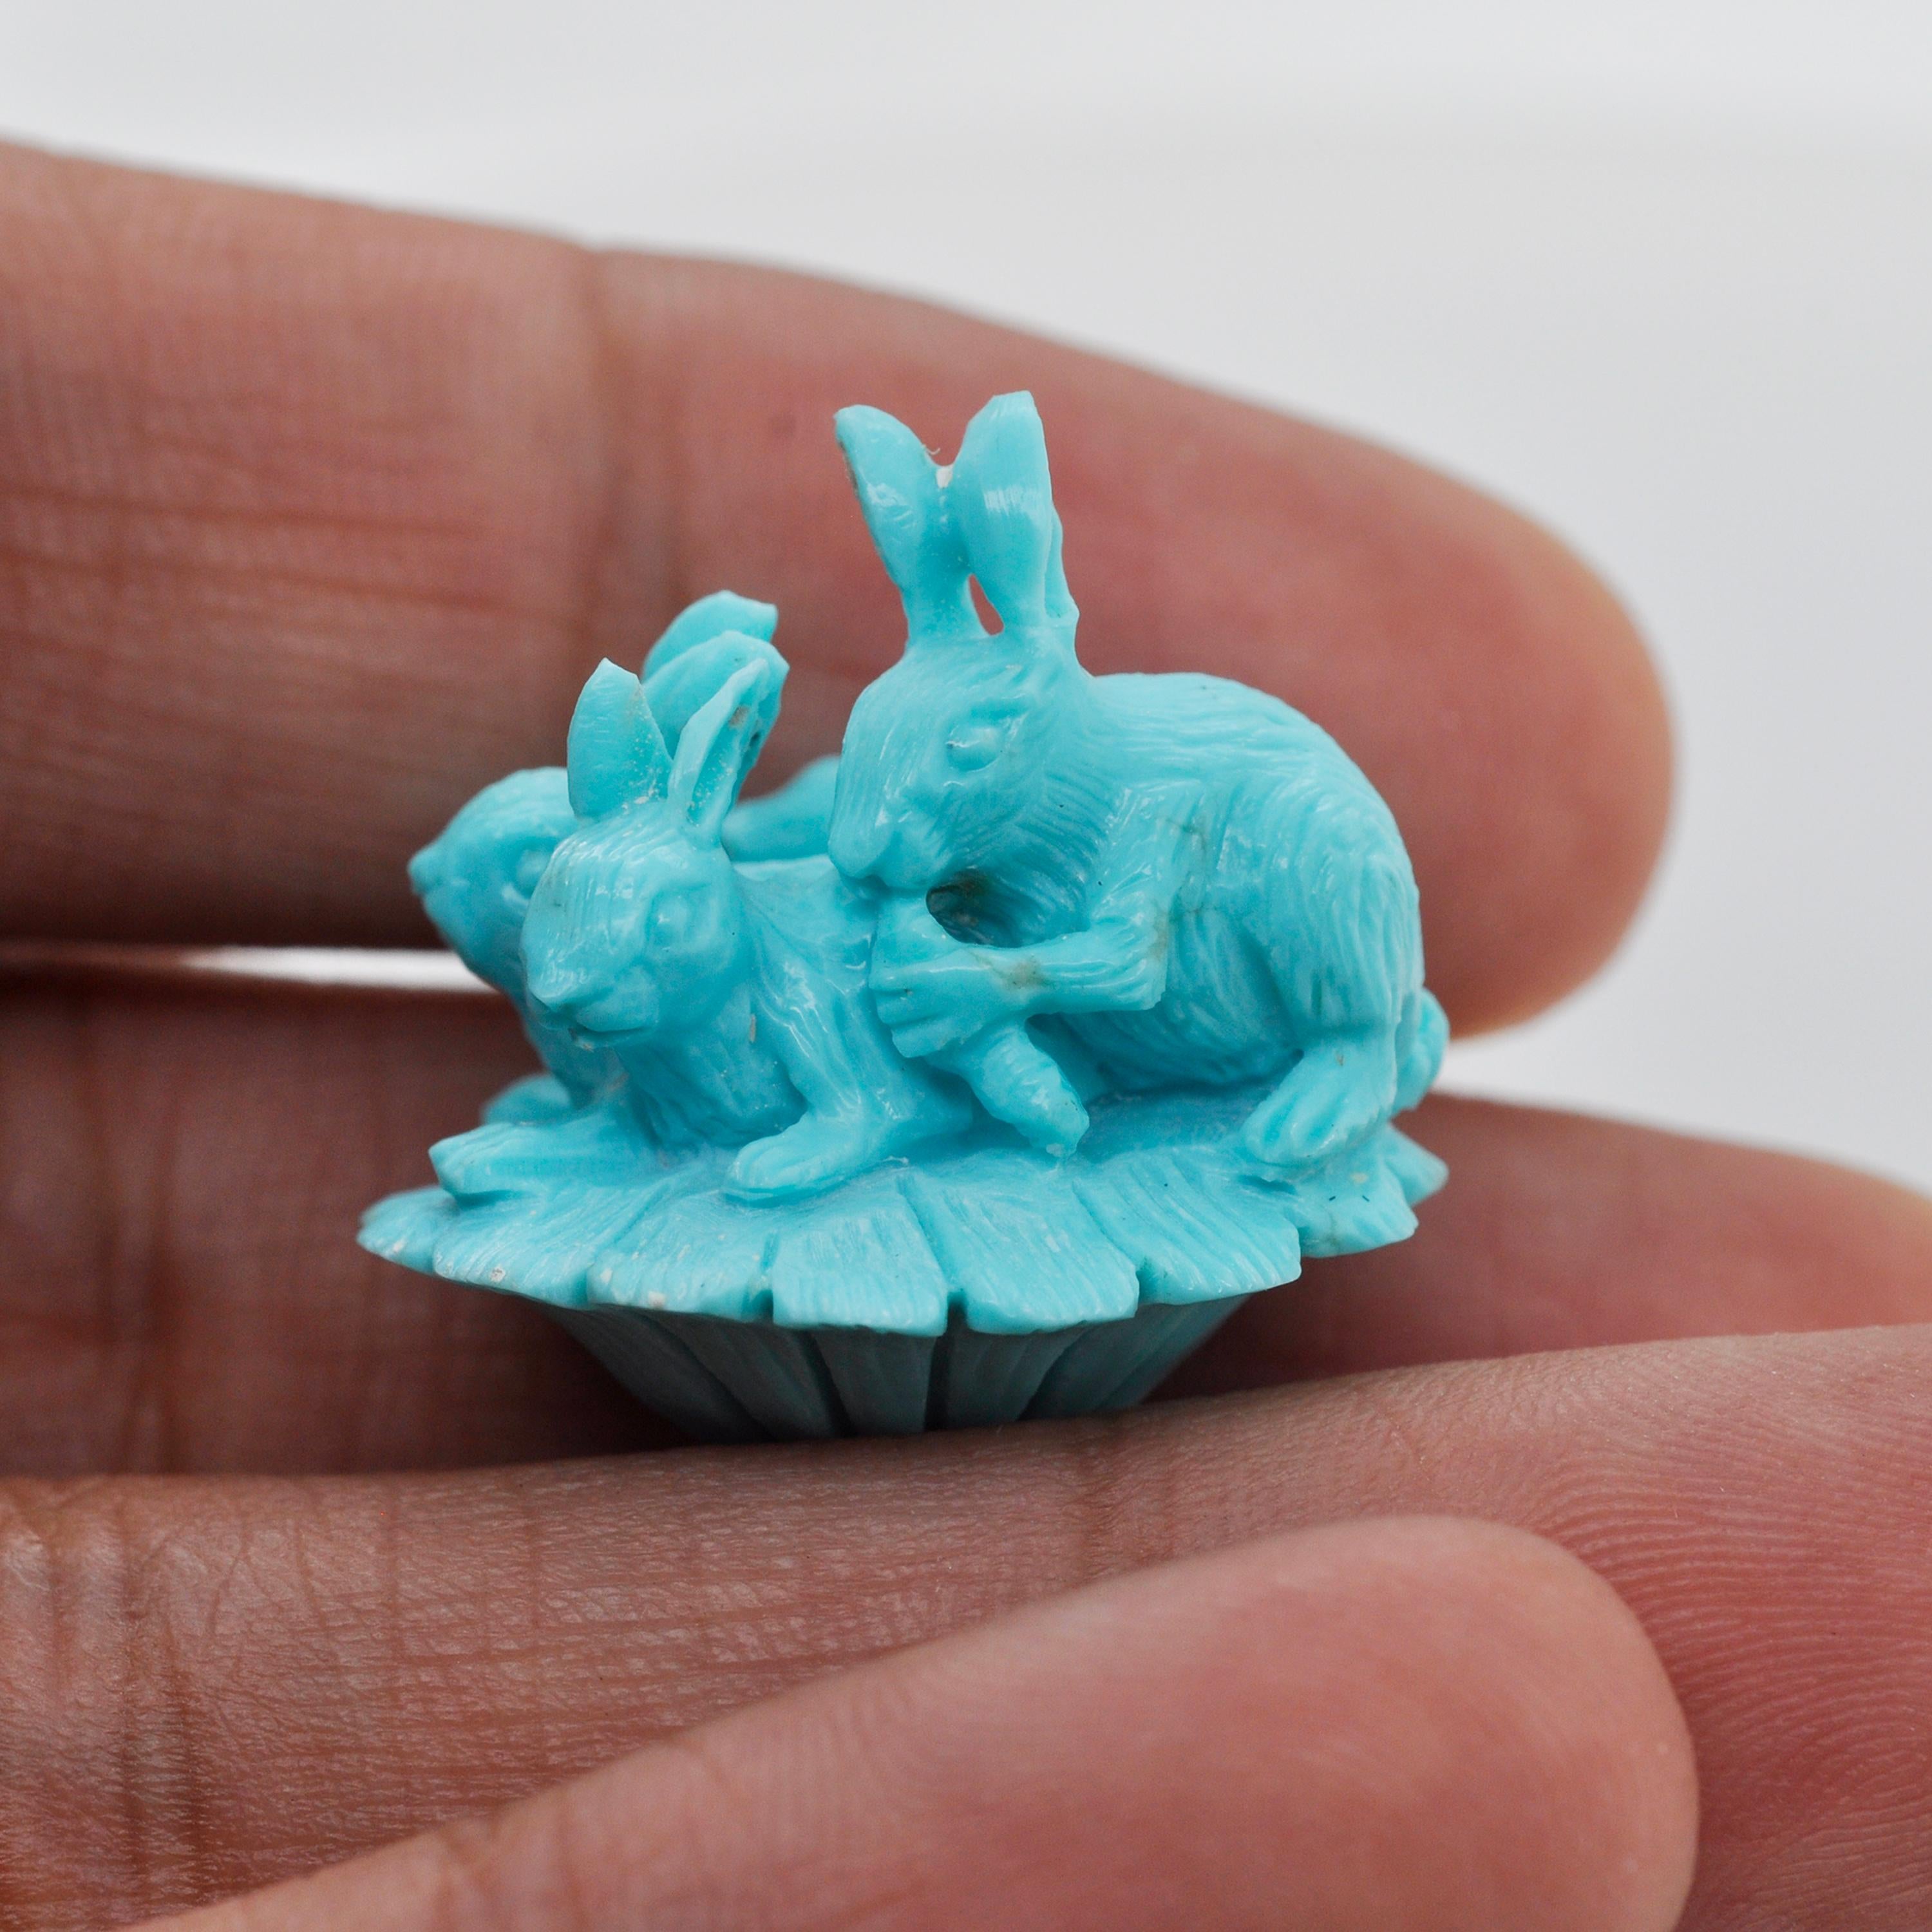 The Hand-Carved 34.97 Carats Natural Arizona Turquoise Rabbit Loose Gemstone is a unique and exquisite piece that showcases the artistry of a skilled craftsman. This particular gemstone has been carefully hand-carved to depict four rabbits in